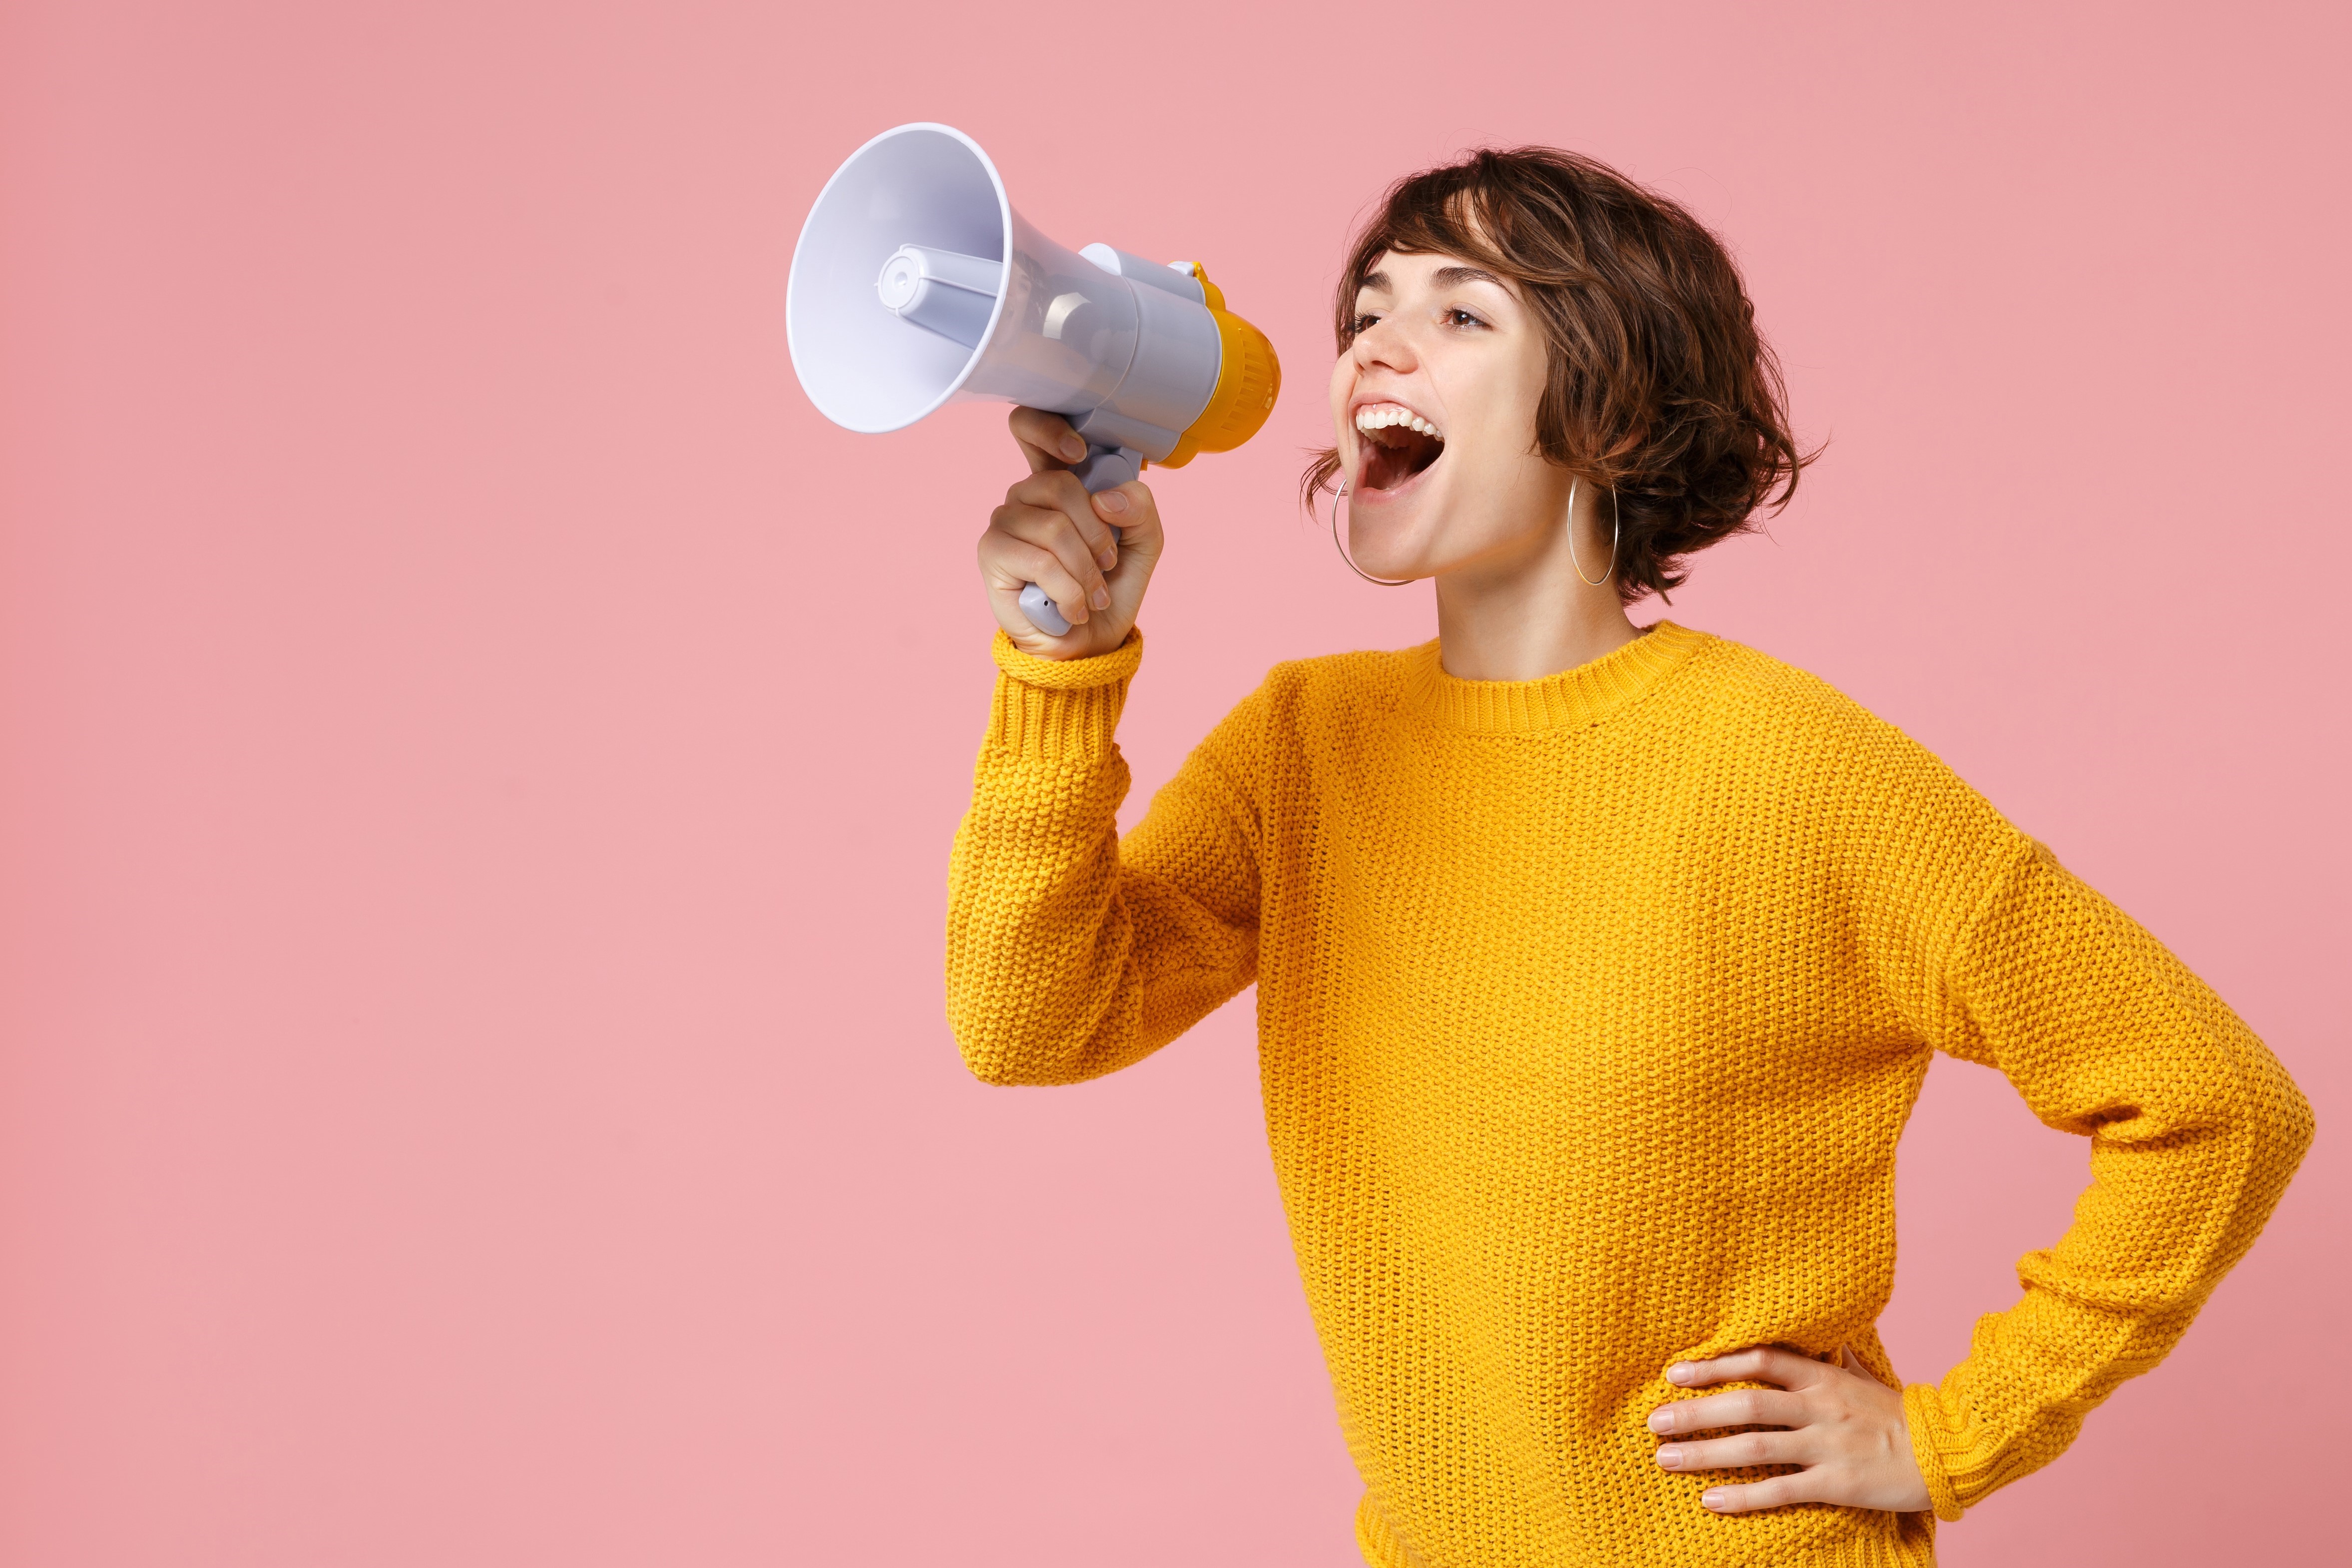 Woman in yellow jumper with megaphone on pink background